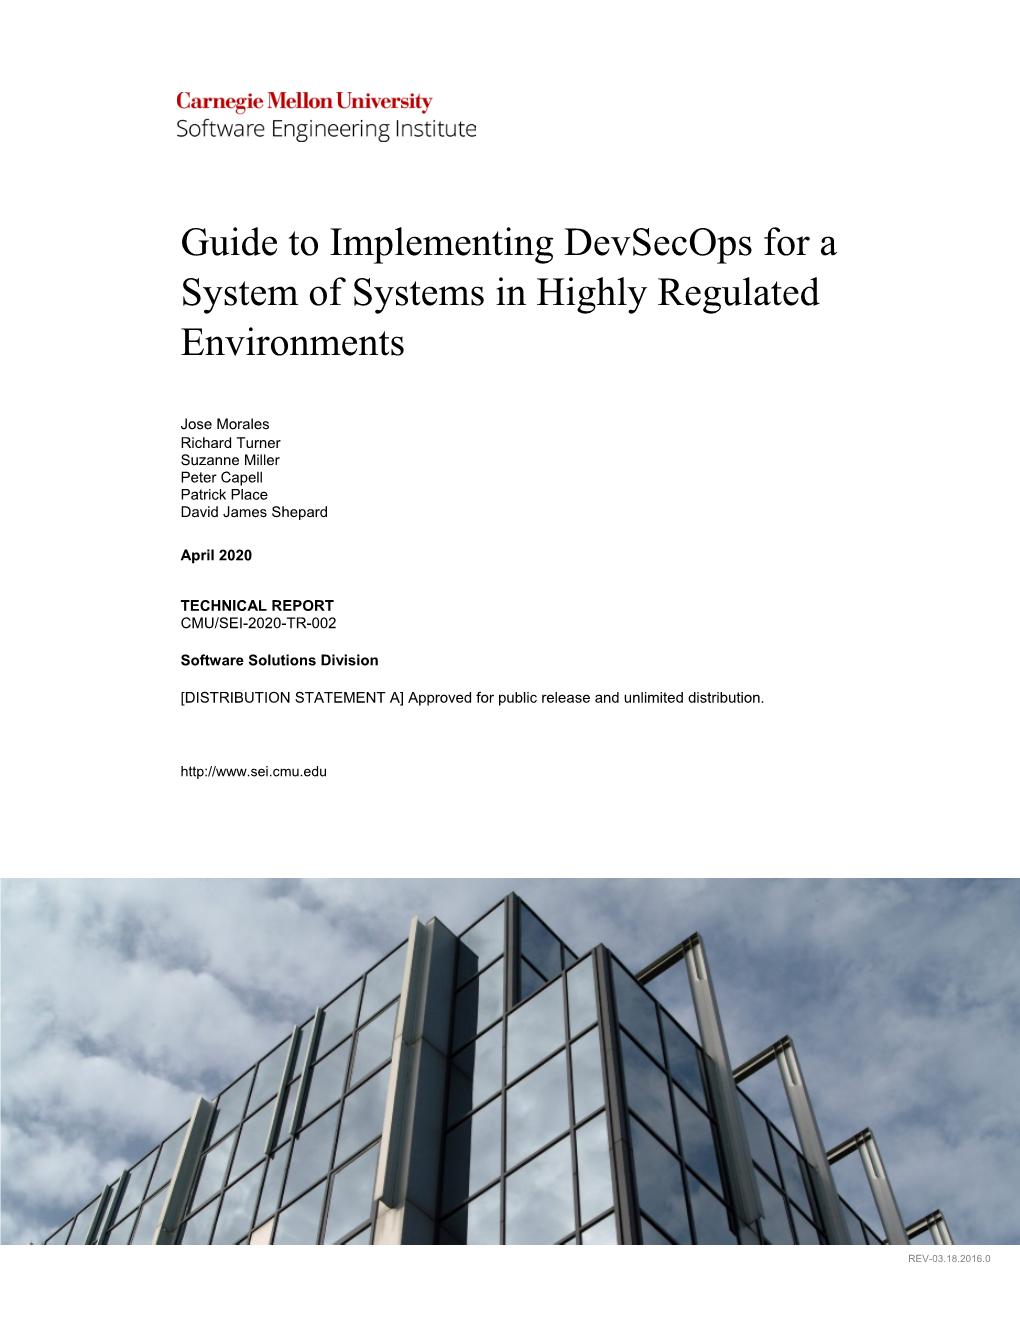 Guide to Implementing Devsecops for a Systems of Systems in Highly Regulated Environments